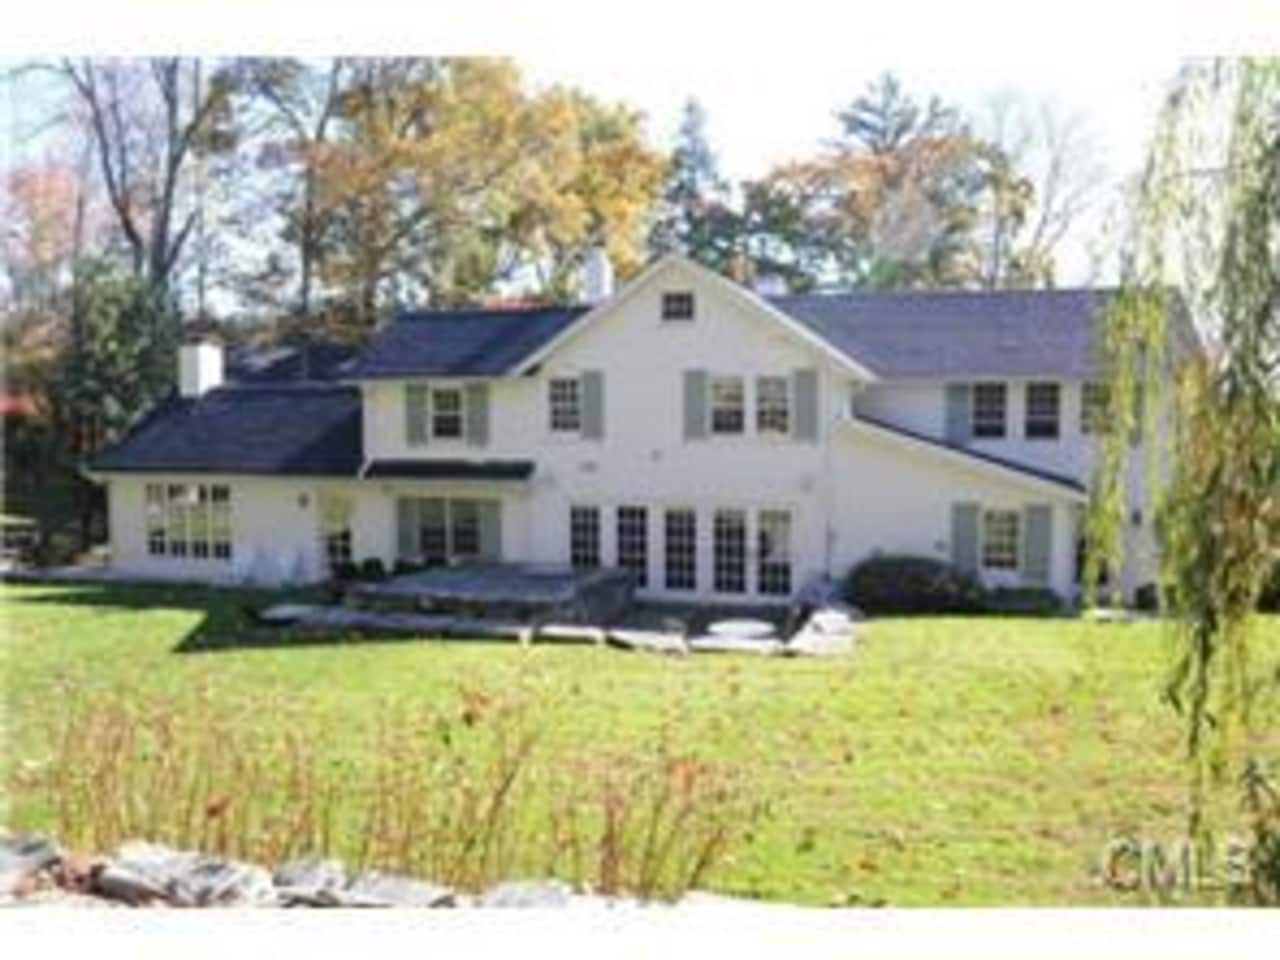 The home at 45 Canoe Hill Road in New Canaan recently sold for $1.68 million. 